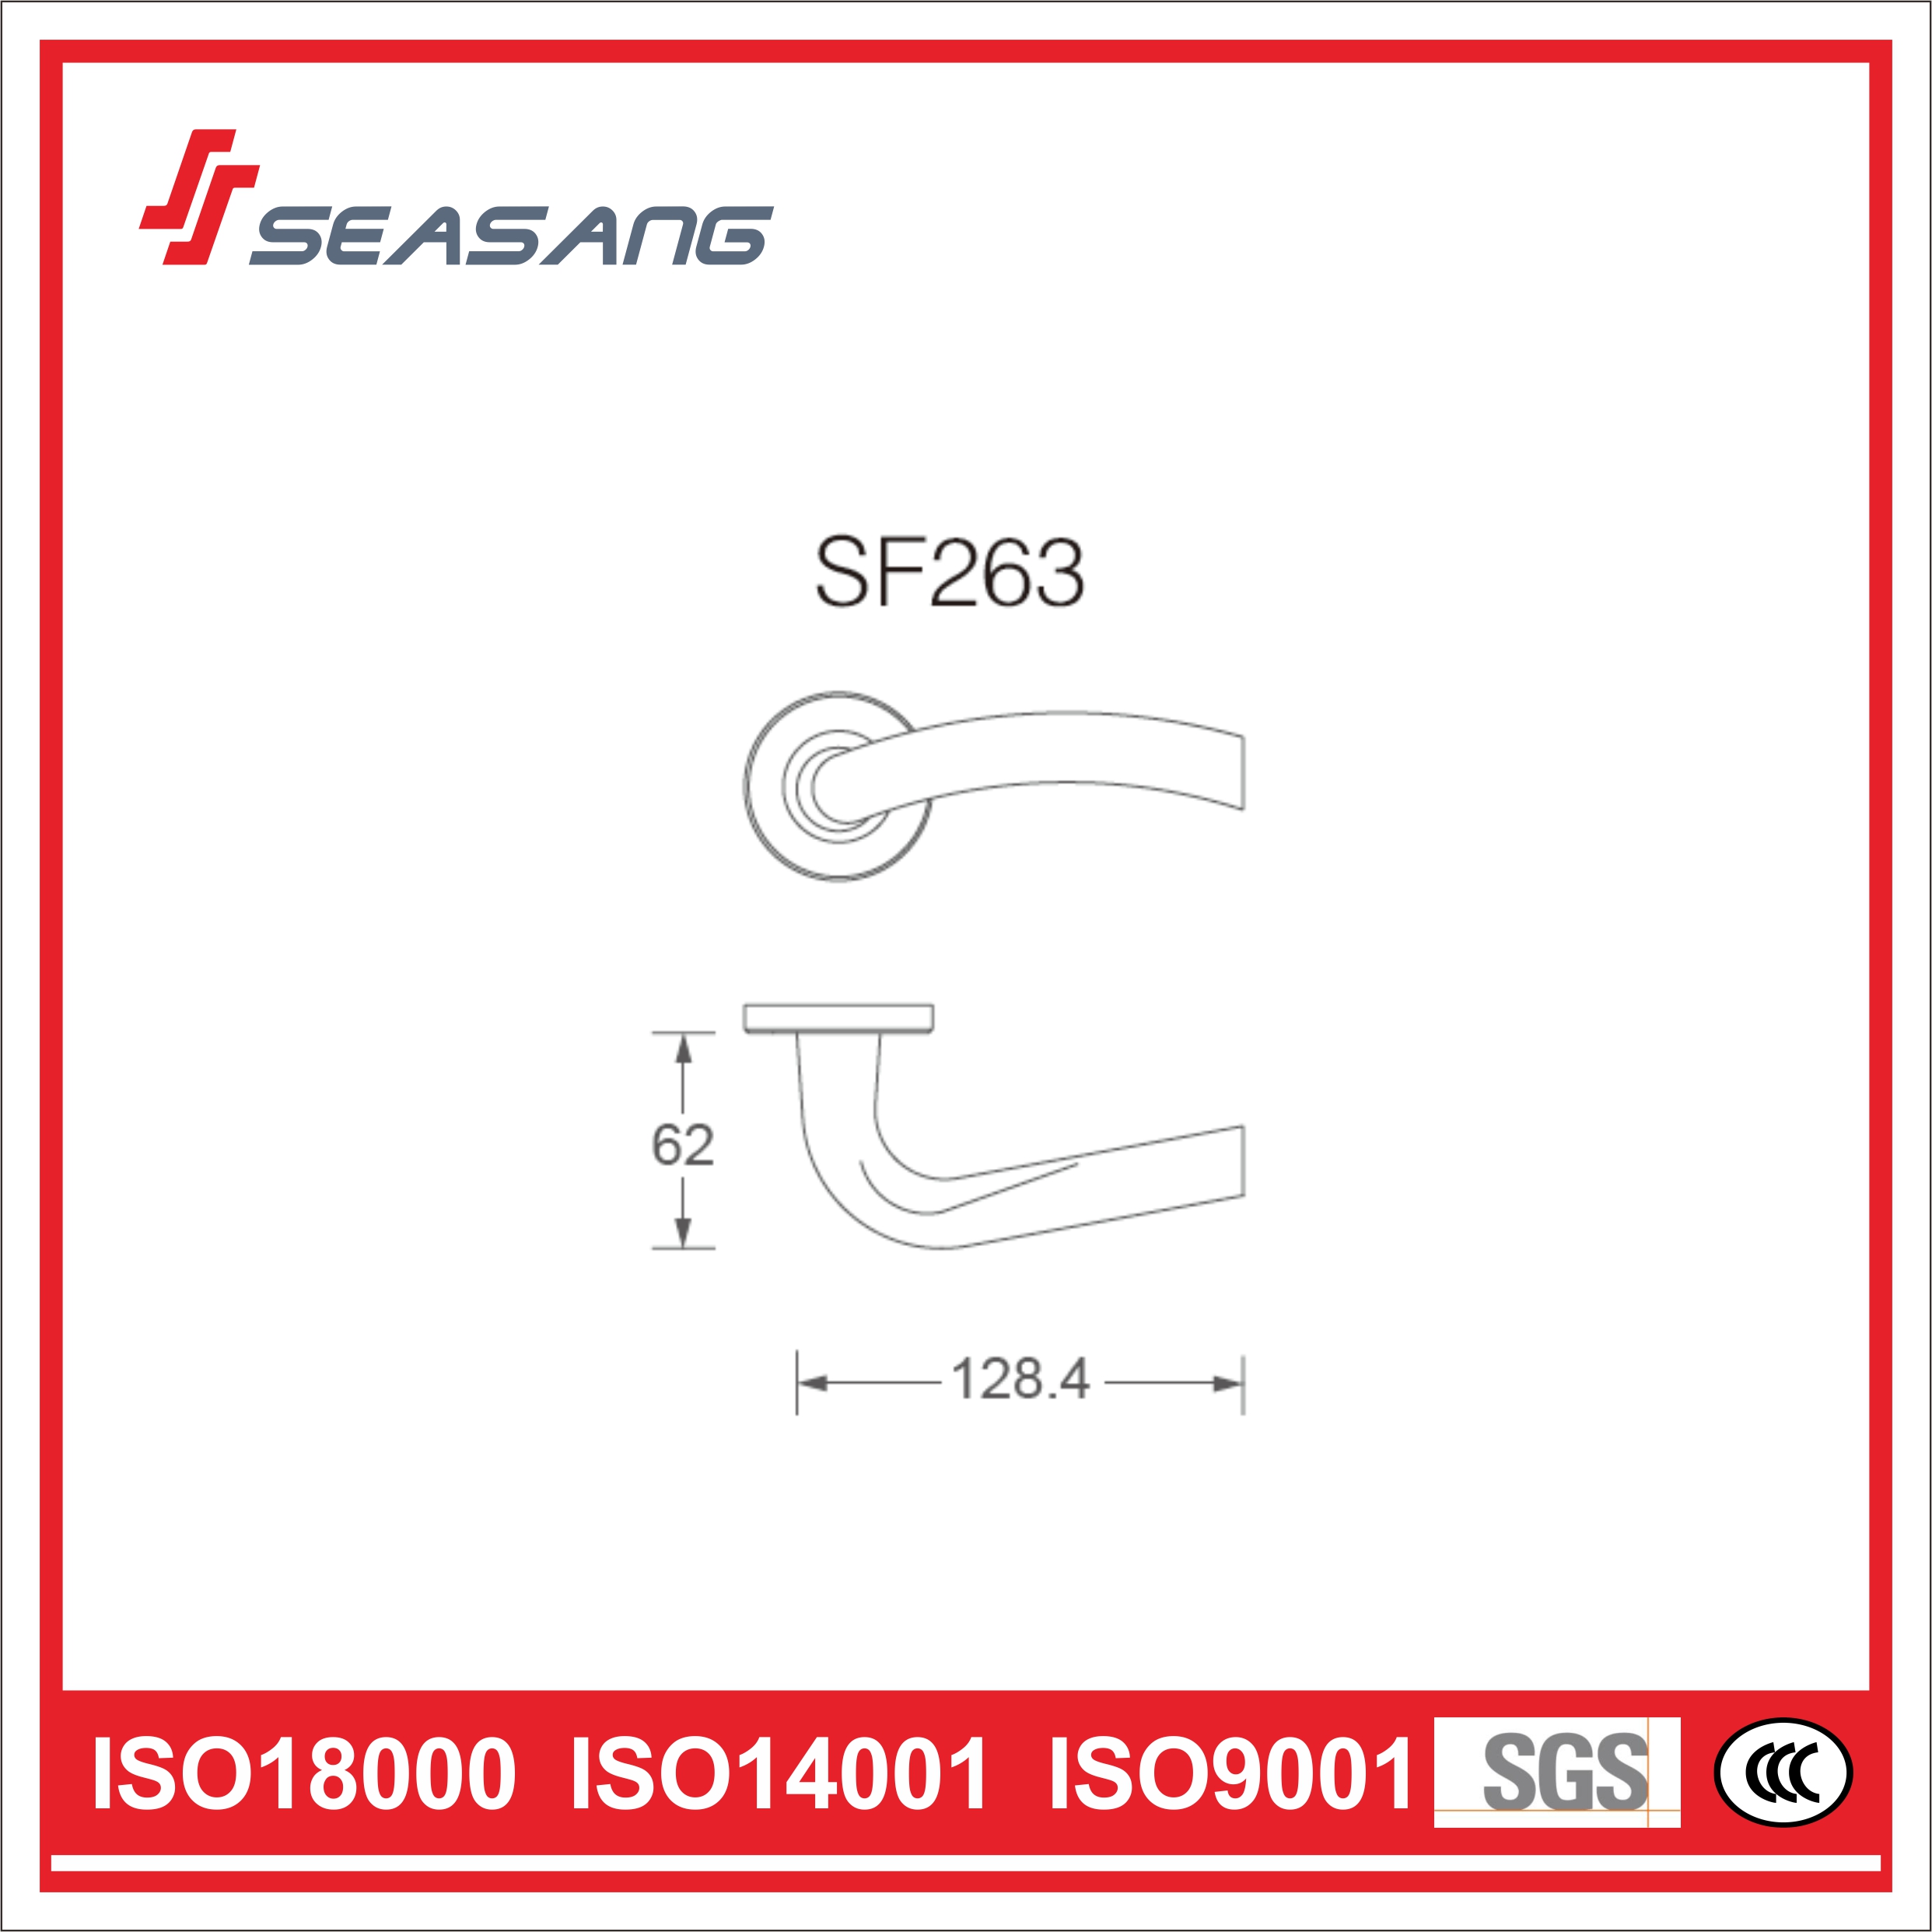 Stainless Steel 304 Solid Casting Square Door Lever Handle